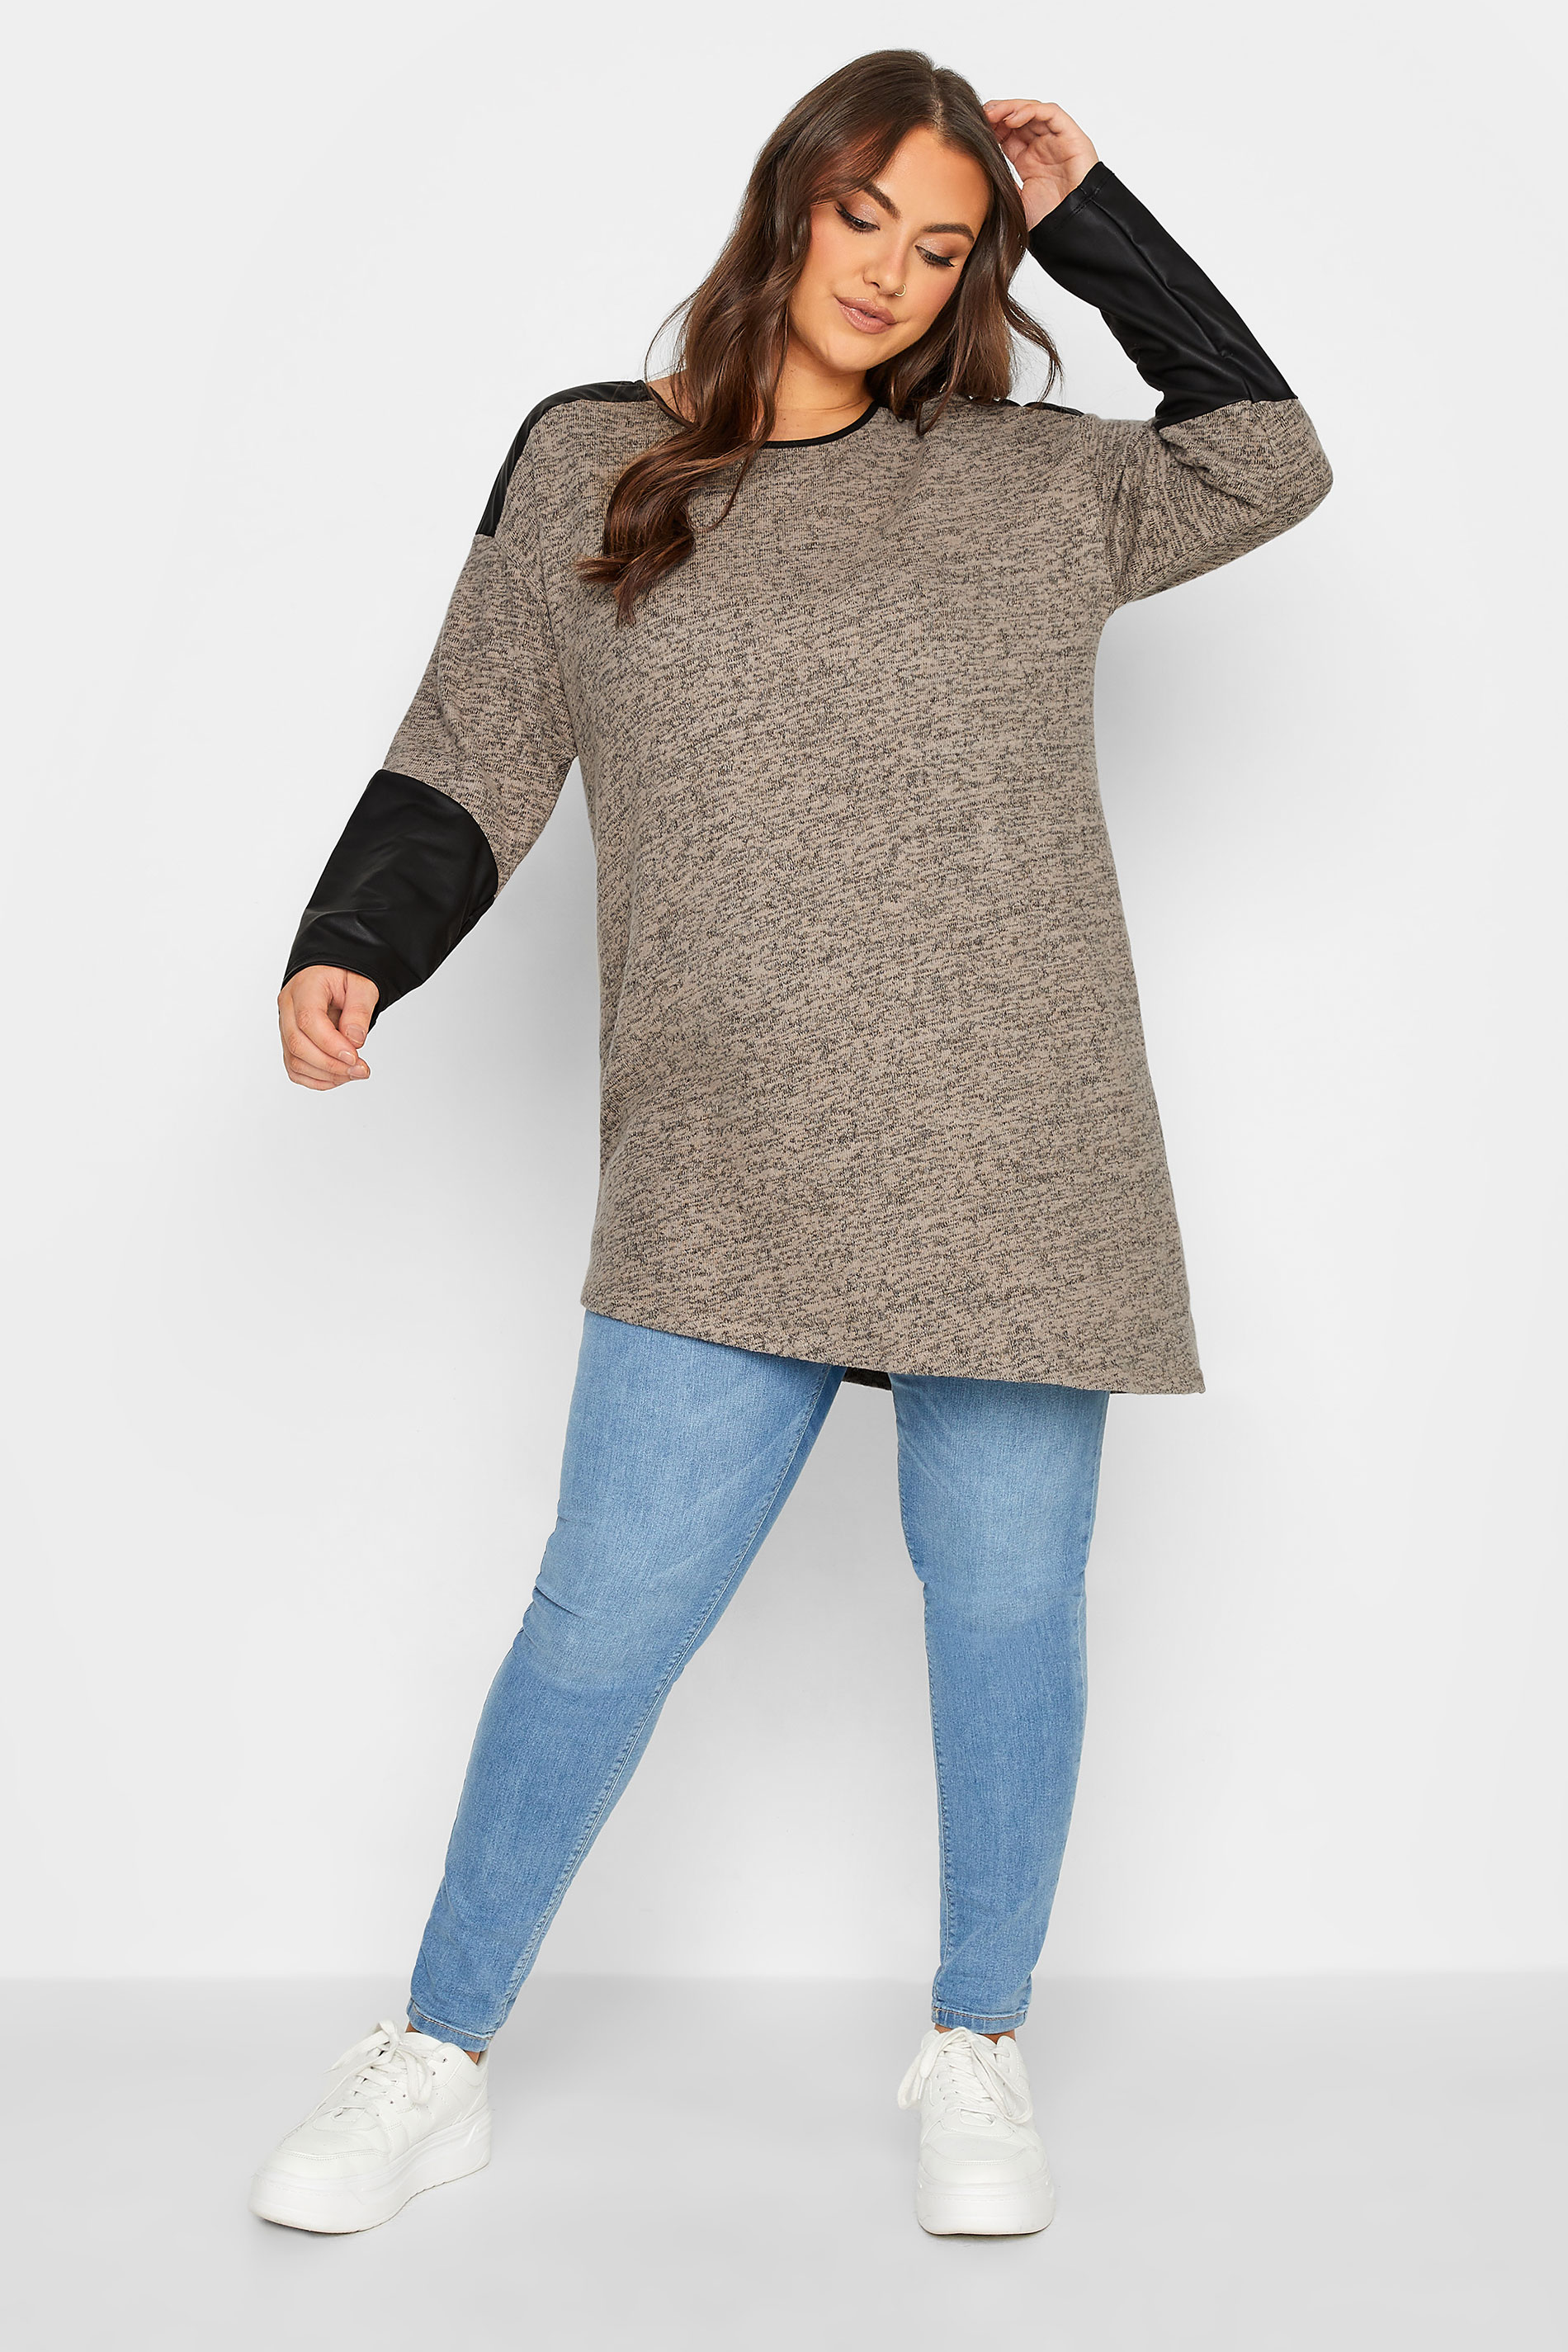 Curve Plus Size Charcoal Grey & Black Soft Touch Faux Leather Top | Yours Clothing 2